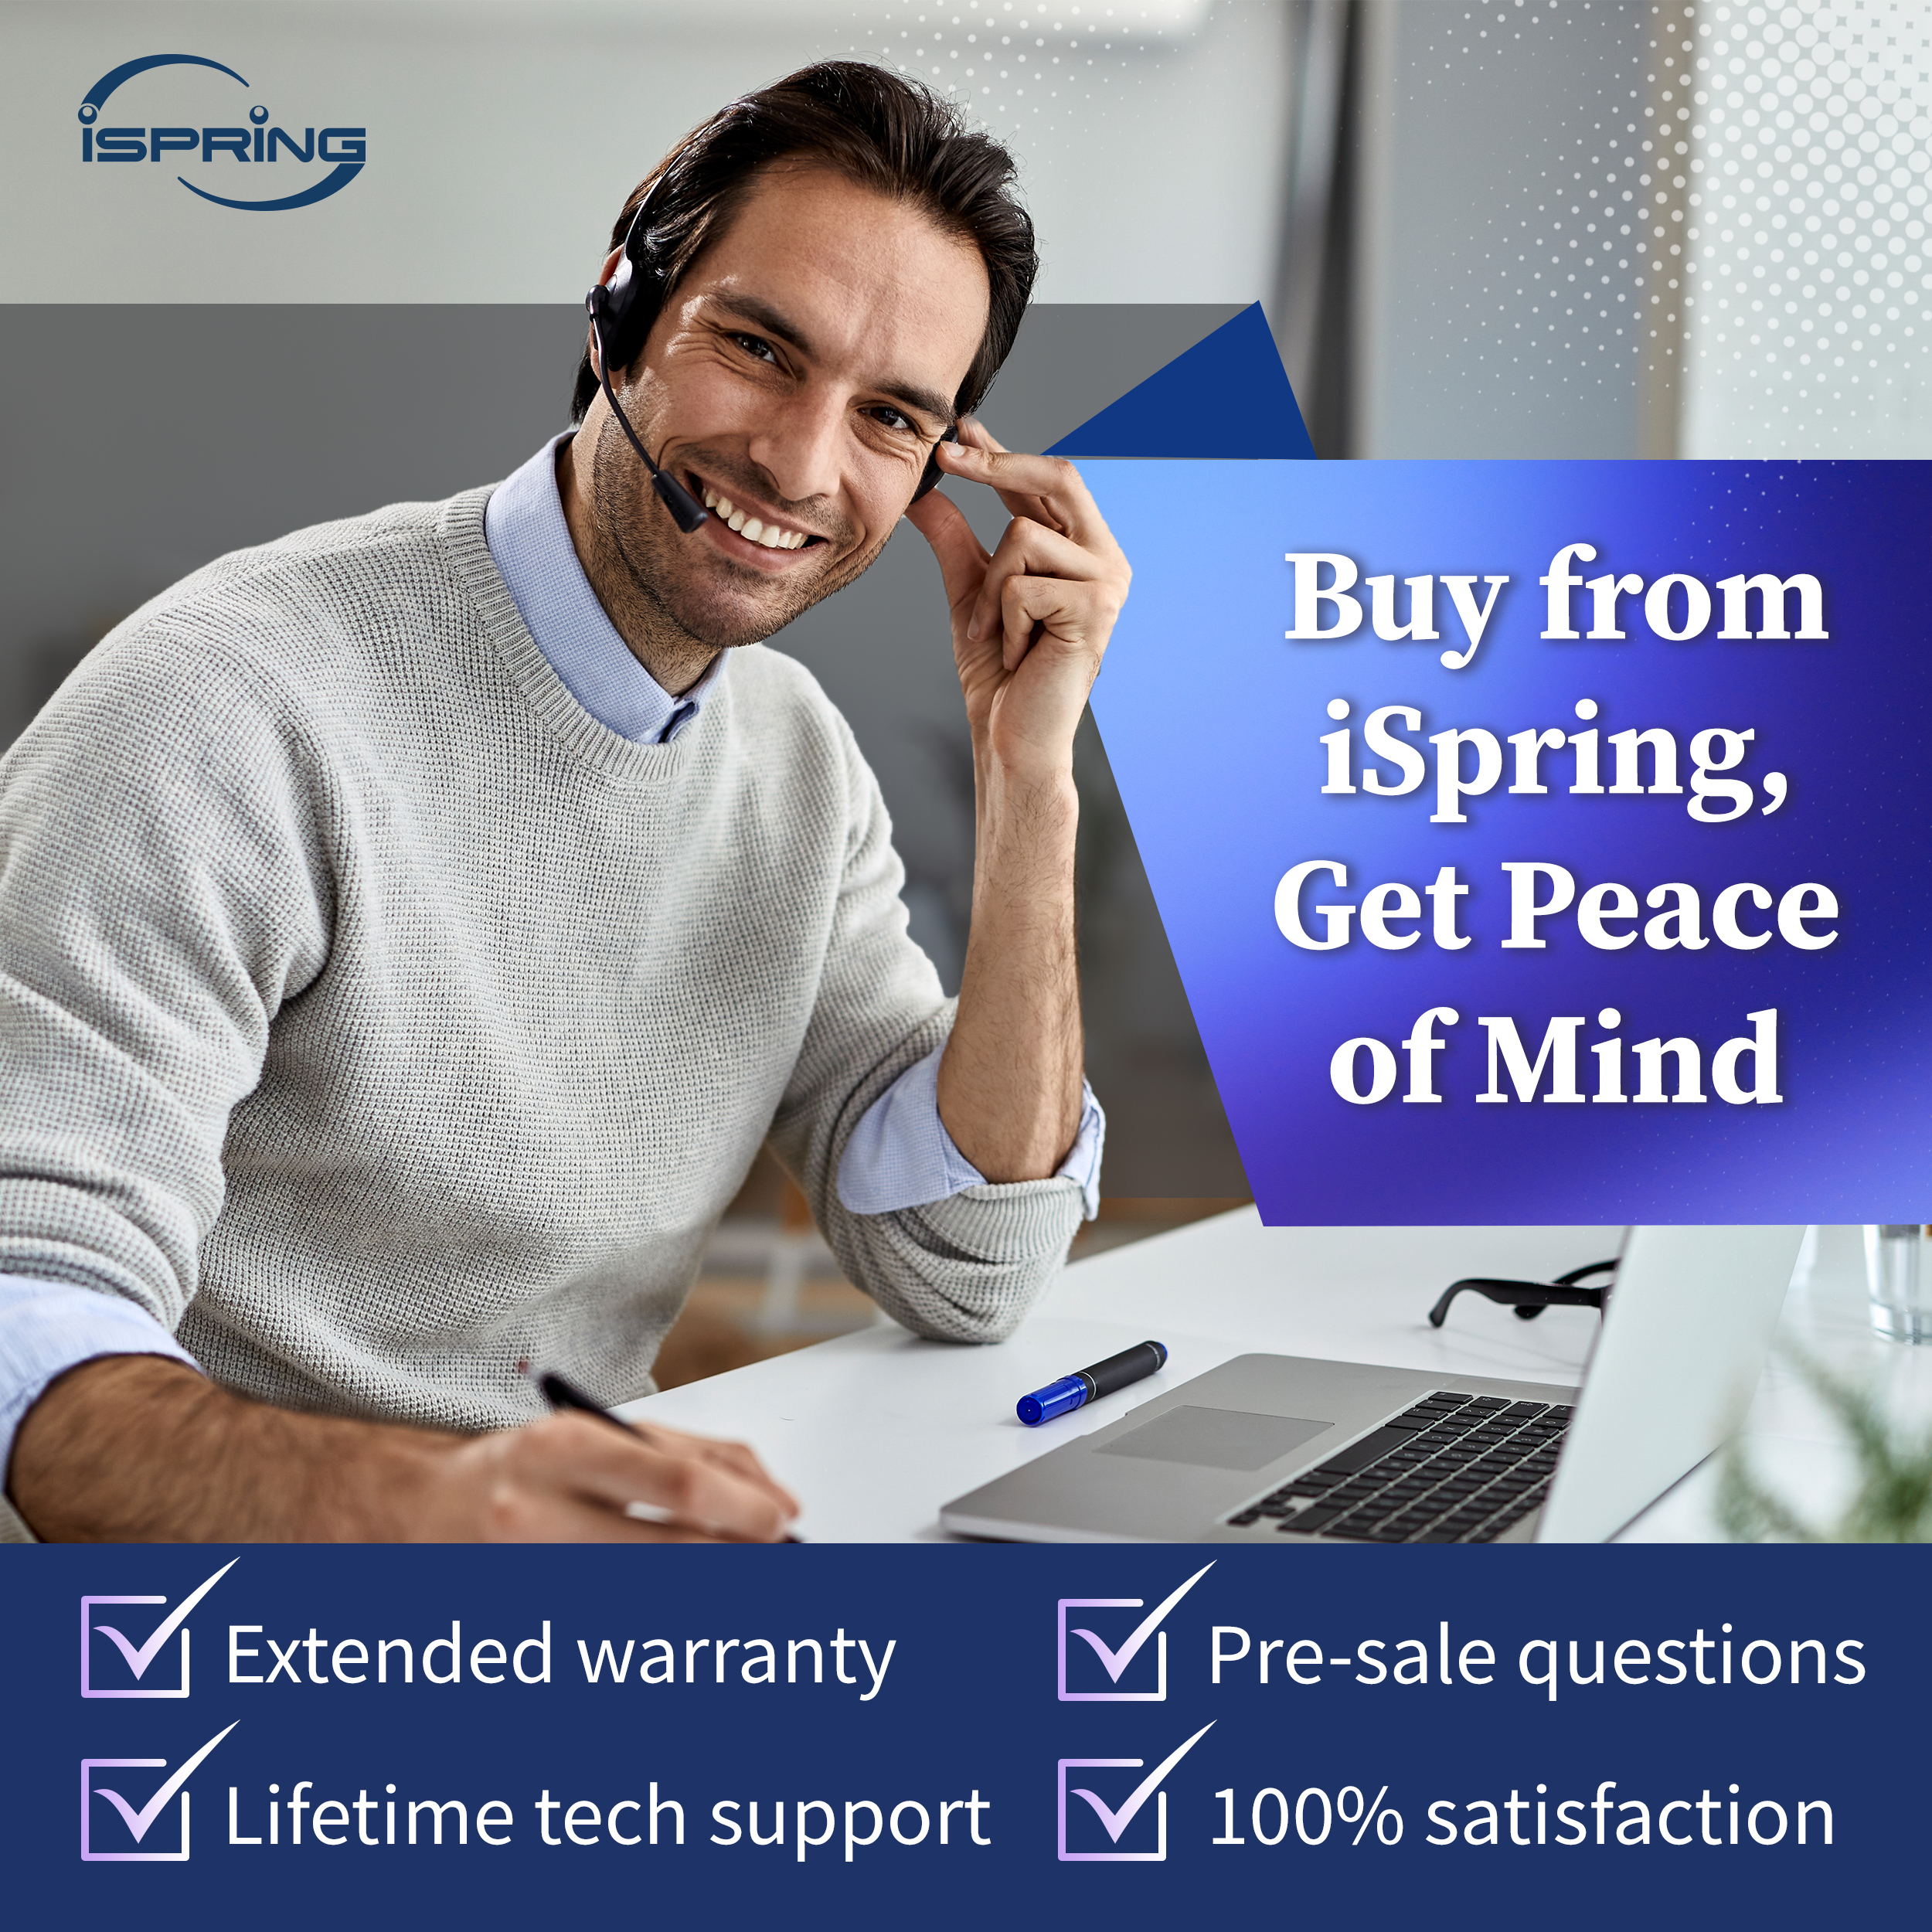 Ispring provides life time customer support